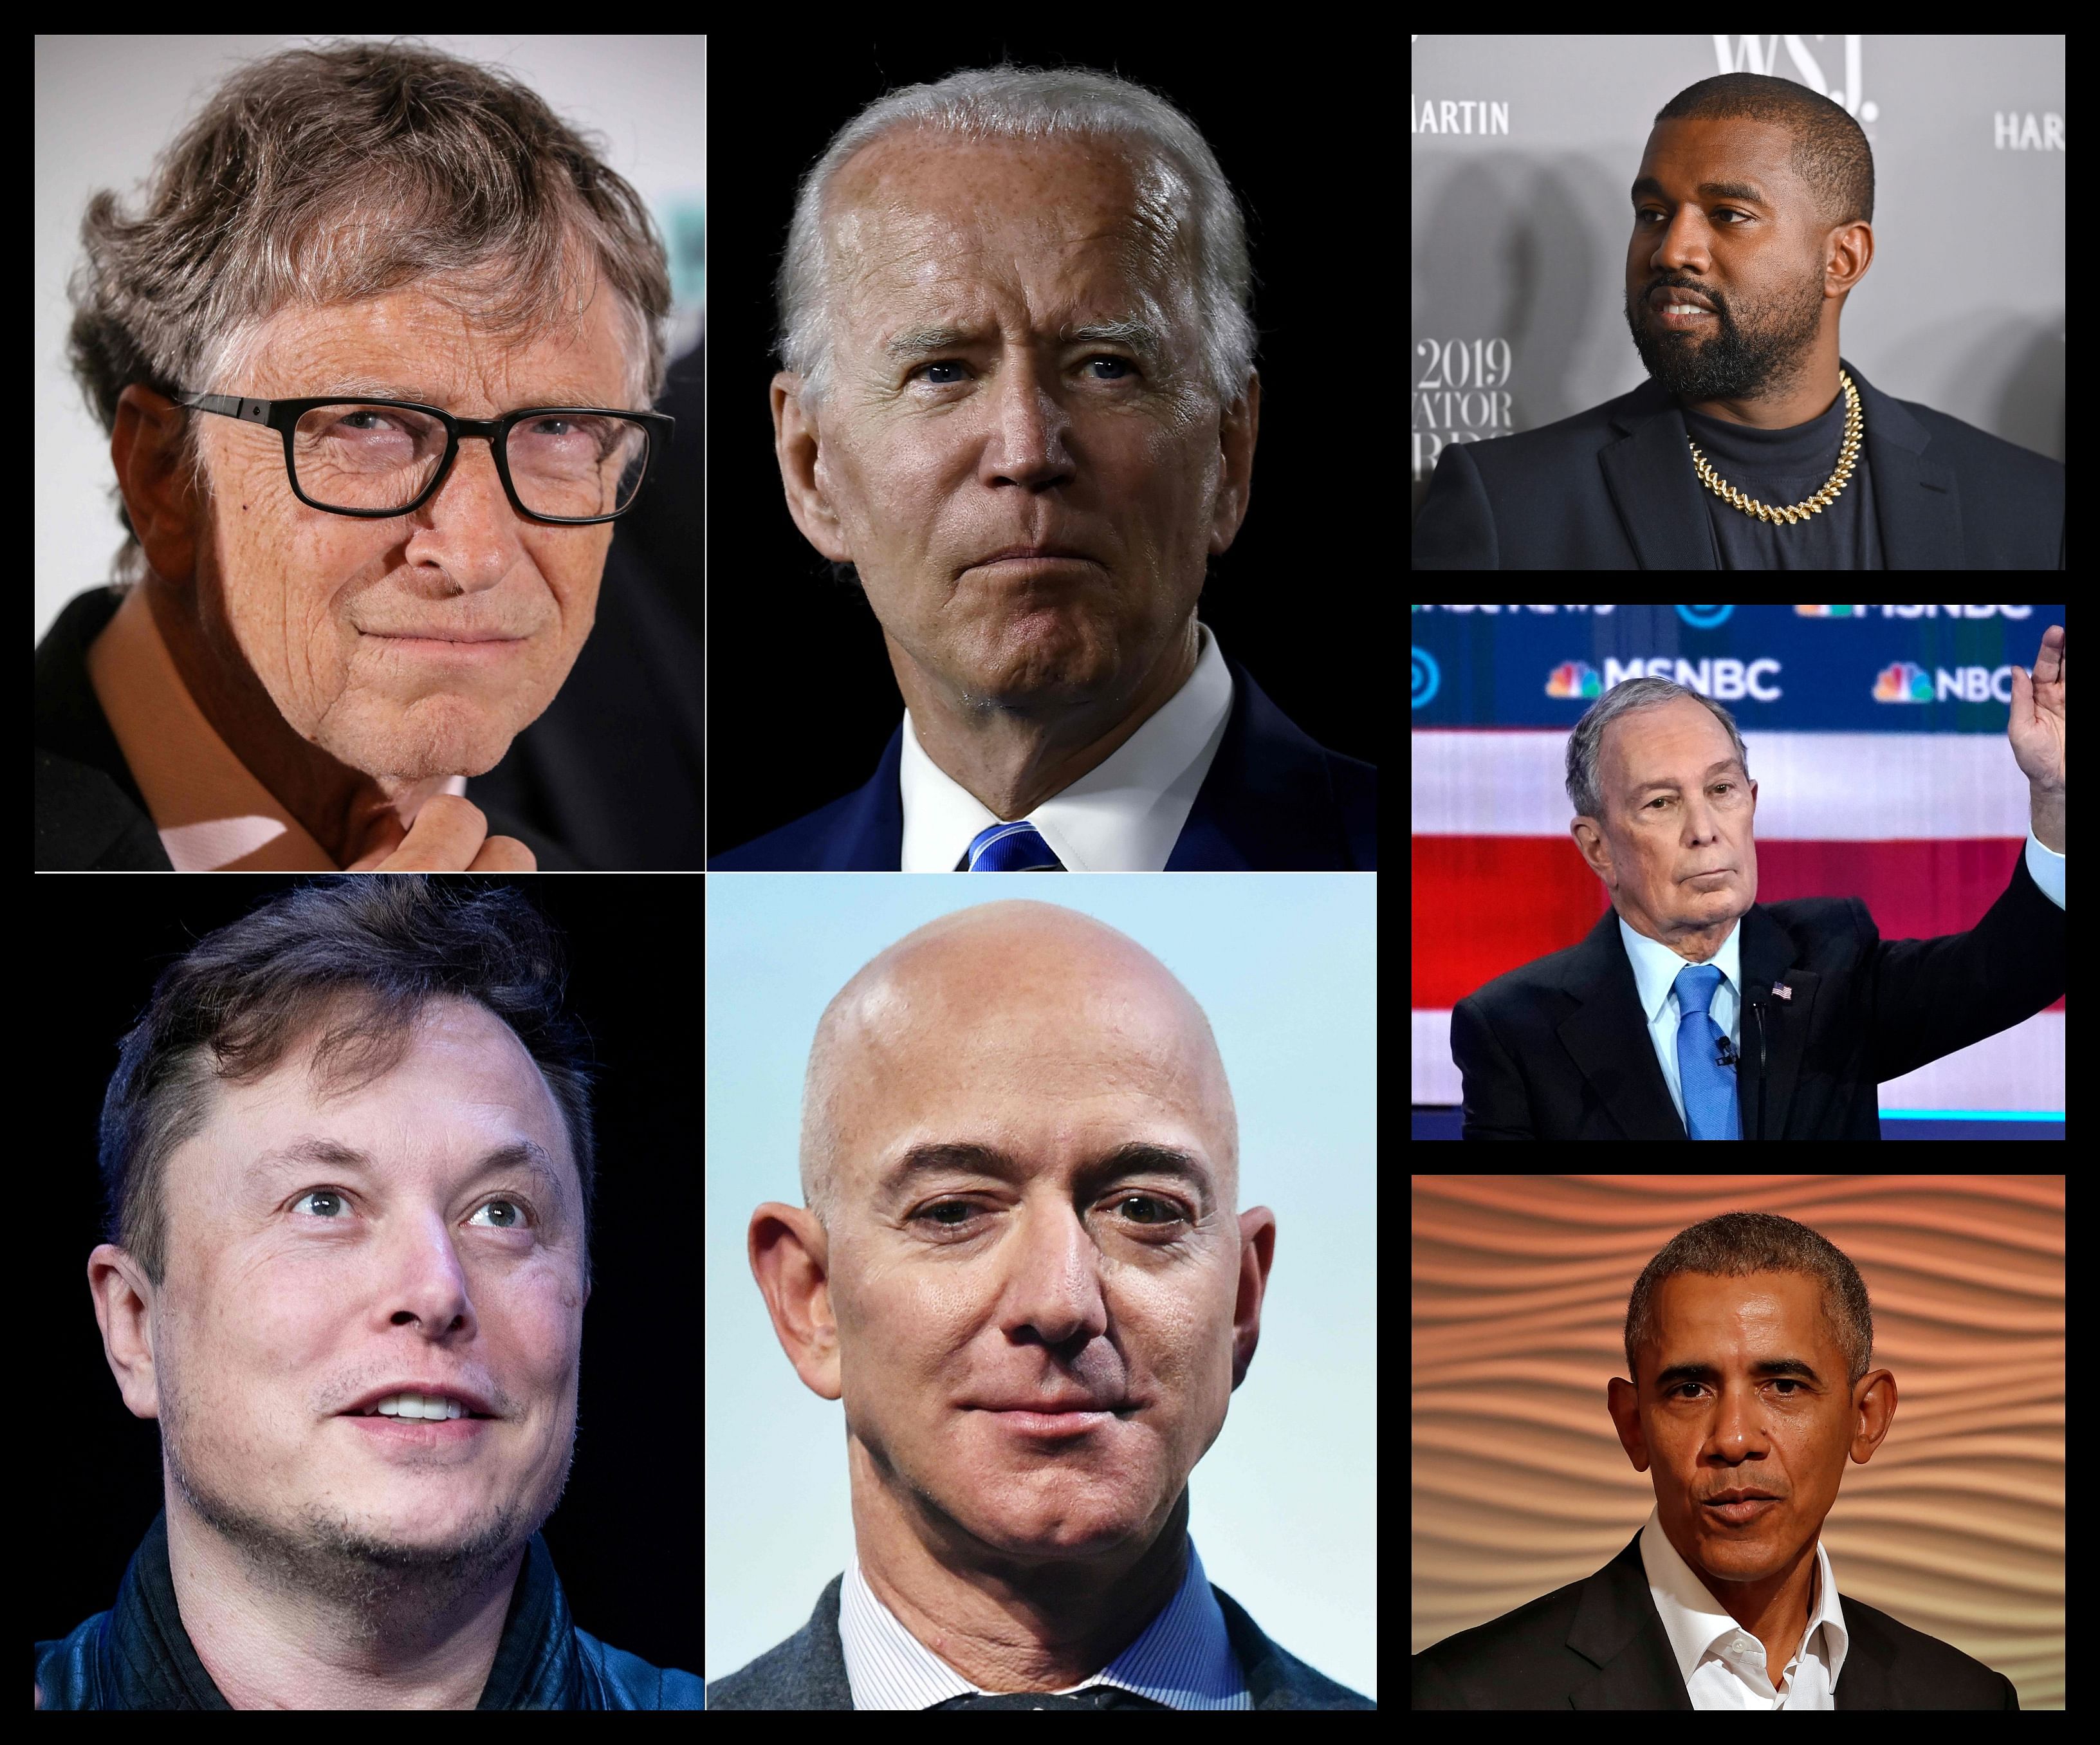 The list of accounts commandeered simultaneously grew rapidly to include Joe Biden, Mike Bloomberg, Barack Obama, Uber, Microsoft co-founder Bill Gates, bitcoin specialty firms, Elon Musk and Jeff Bezos and many others.